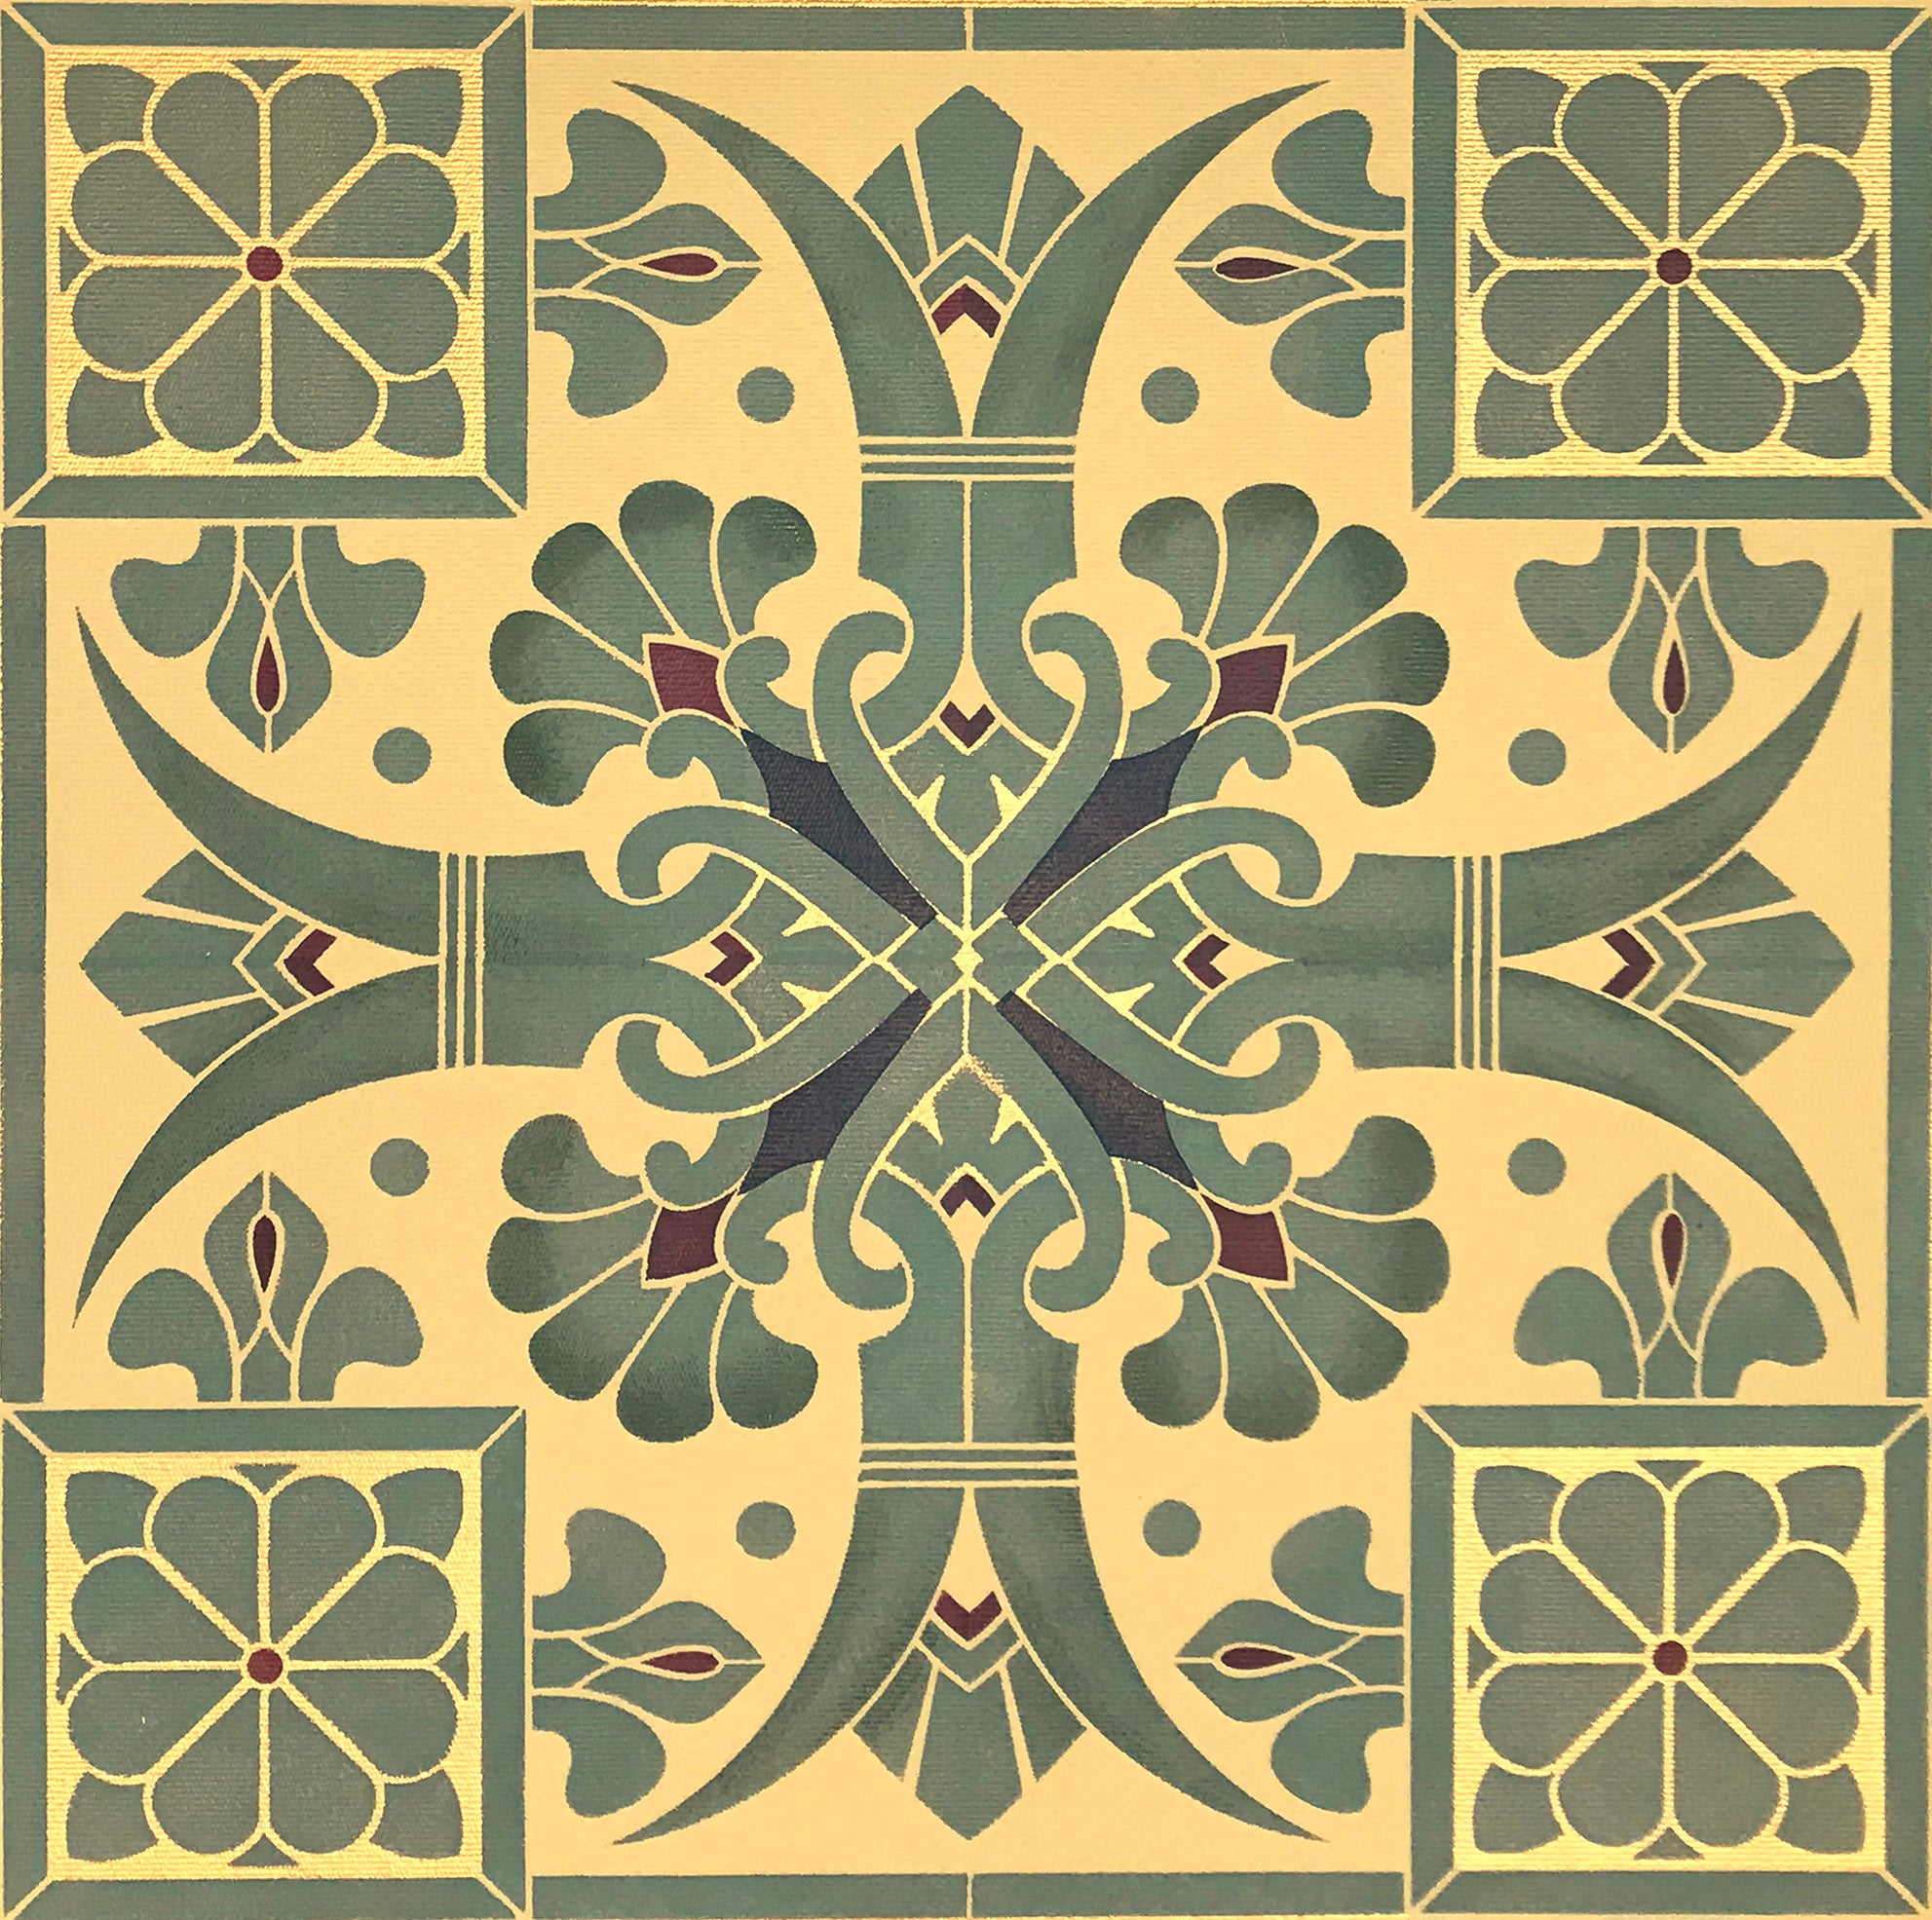 A close up image of the fleur de lis and flower motifs in this design by Christopher Dresser, c. 1875. 